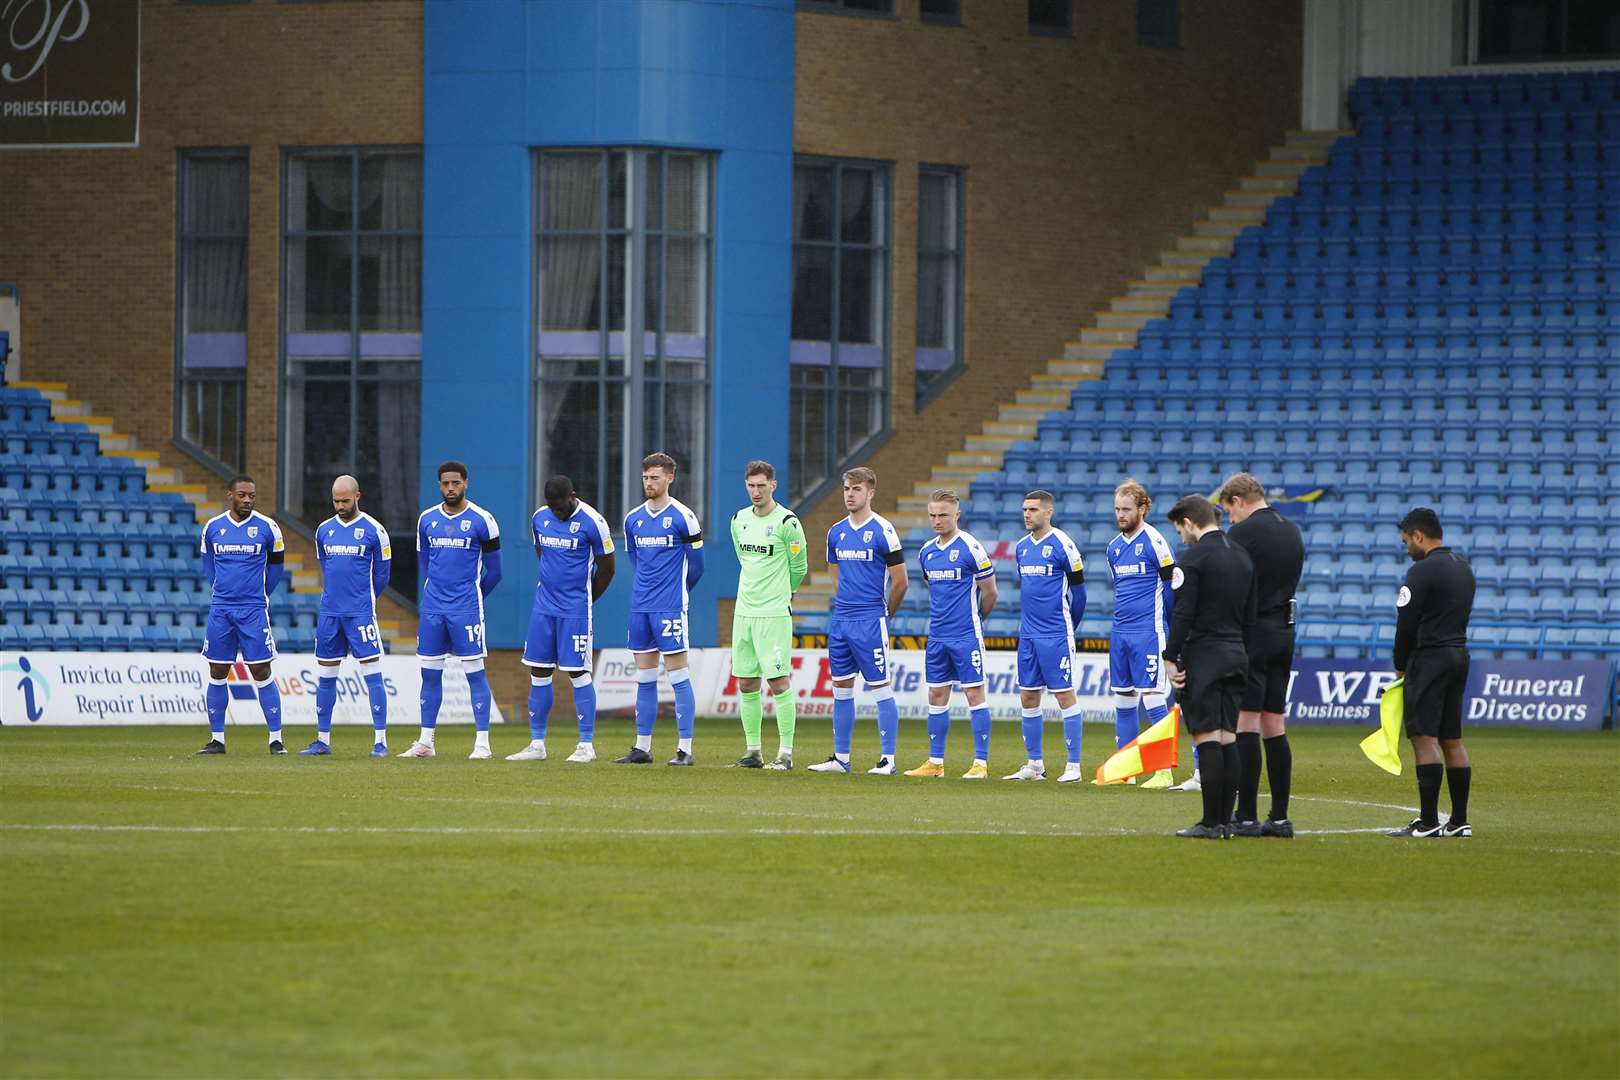 Gillingham players during a two minute silence for HRH Prince Philip before kick off against Shrewsbury on Saturday Picture: Andy Jones